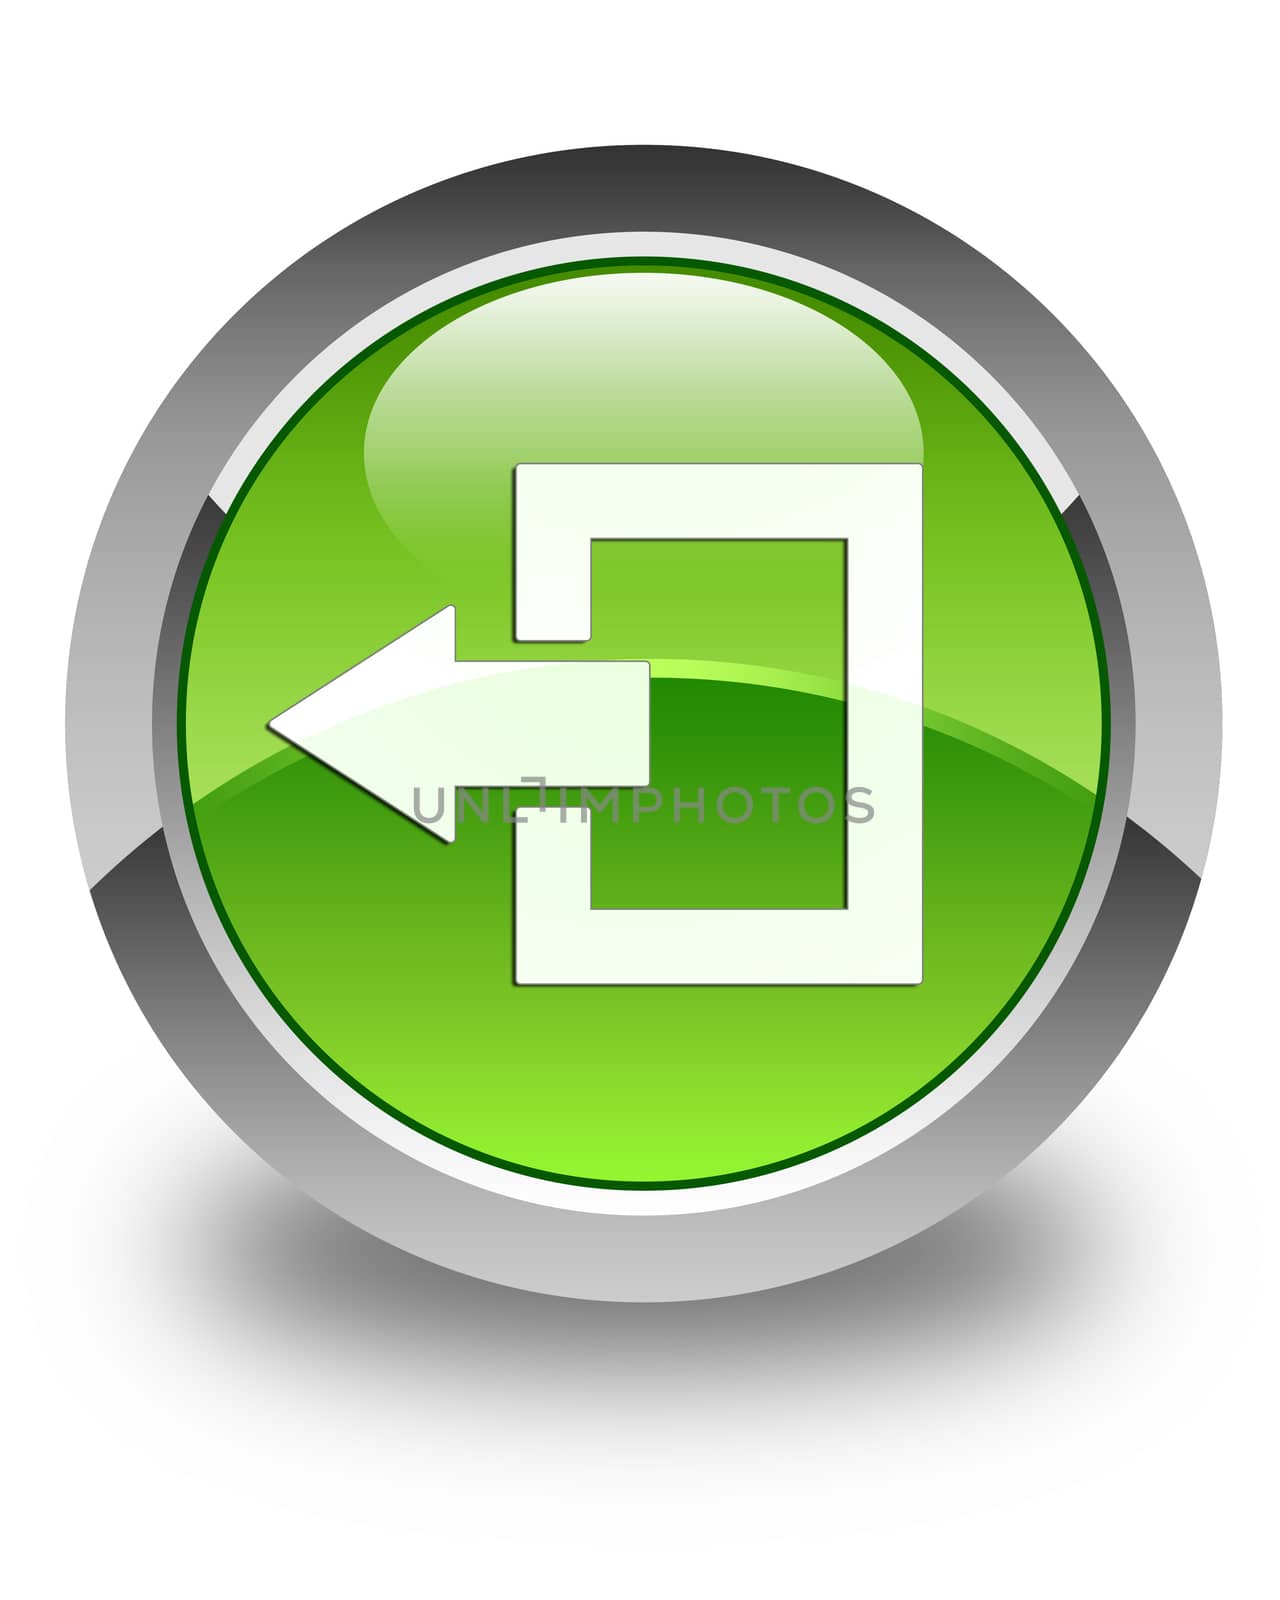 Logout icon glossy green round button